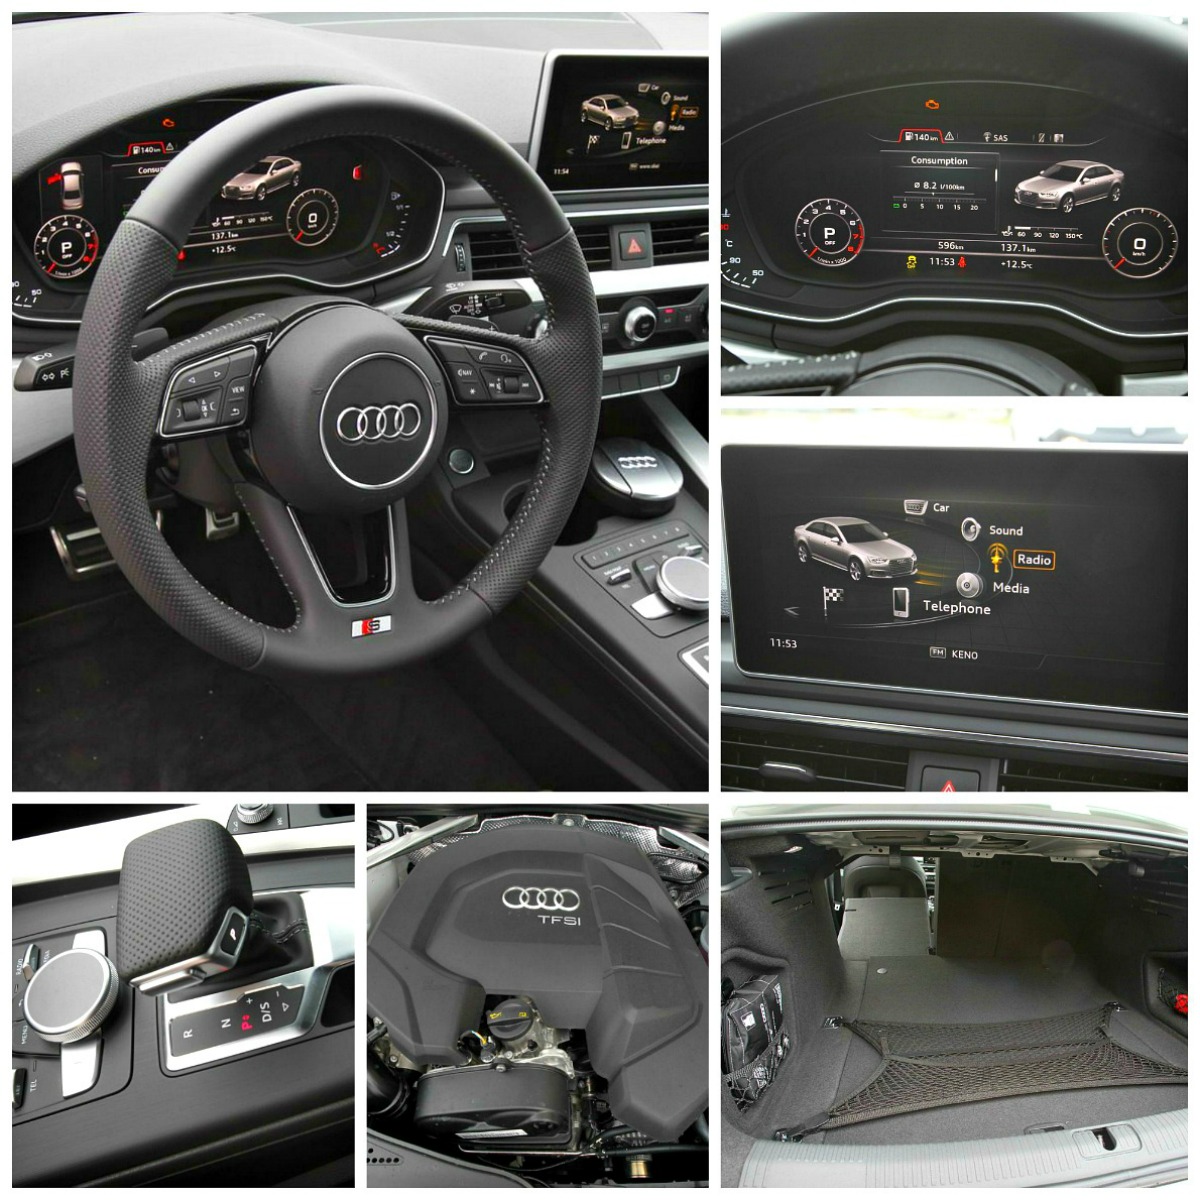 Audi A4 collage